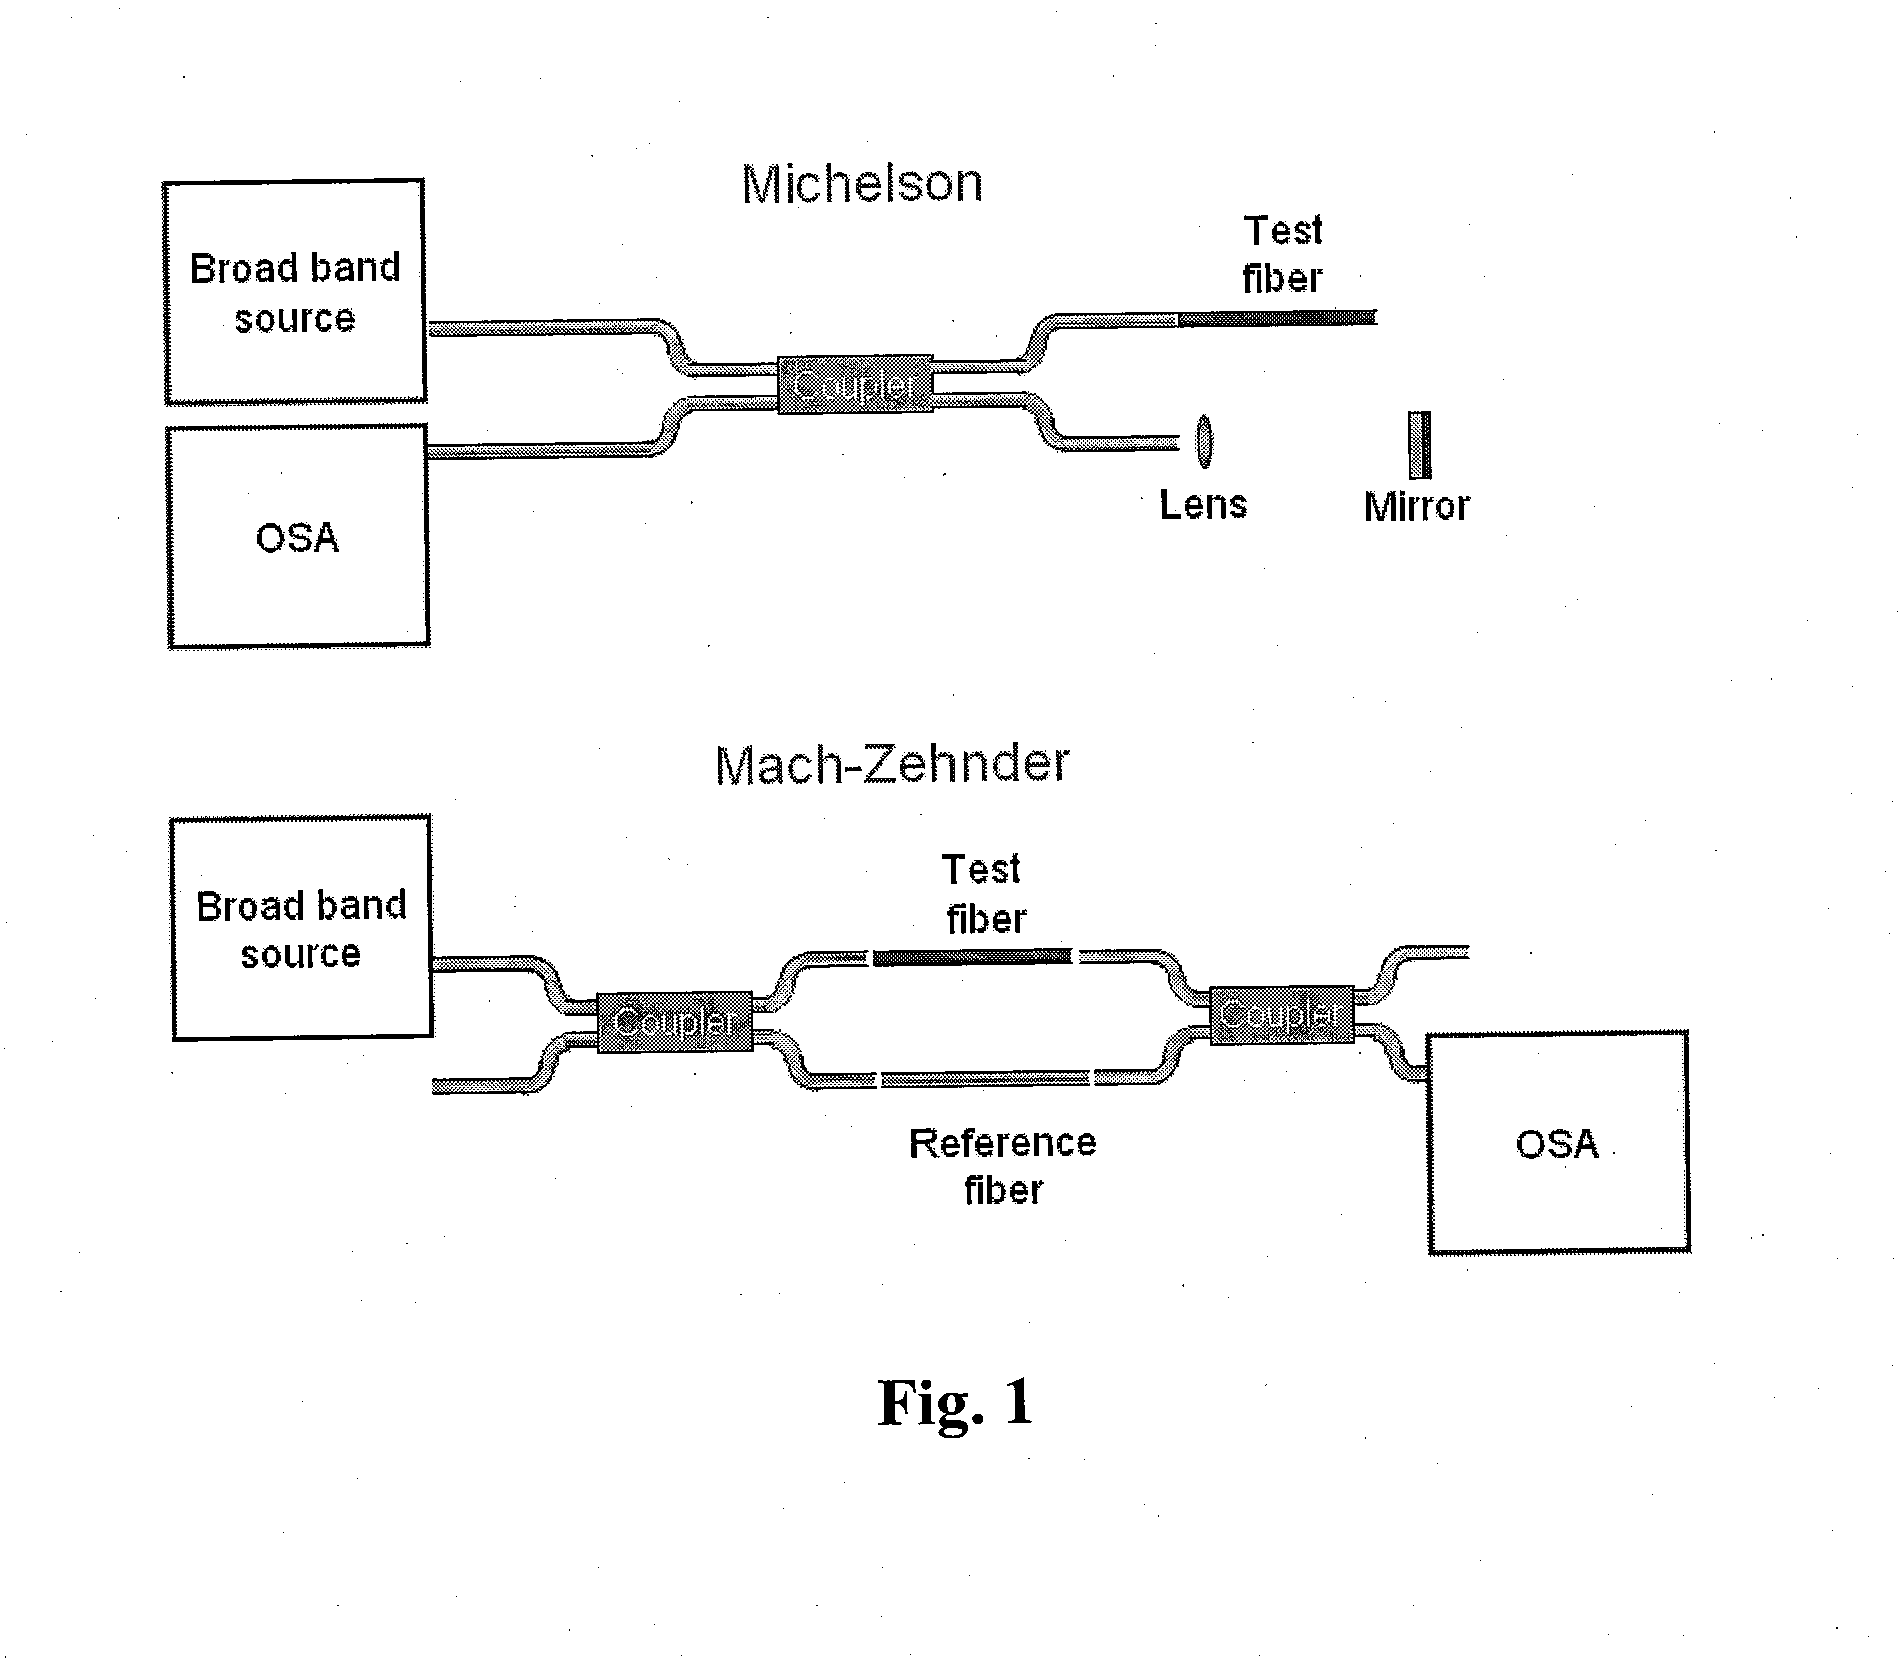 System and Method to Determine Chromatic Dispersion in Short Lengths of Waveguides Using a Common Path Interferometer